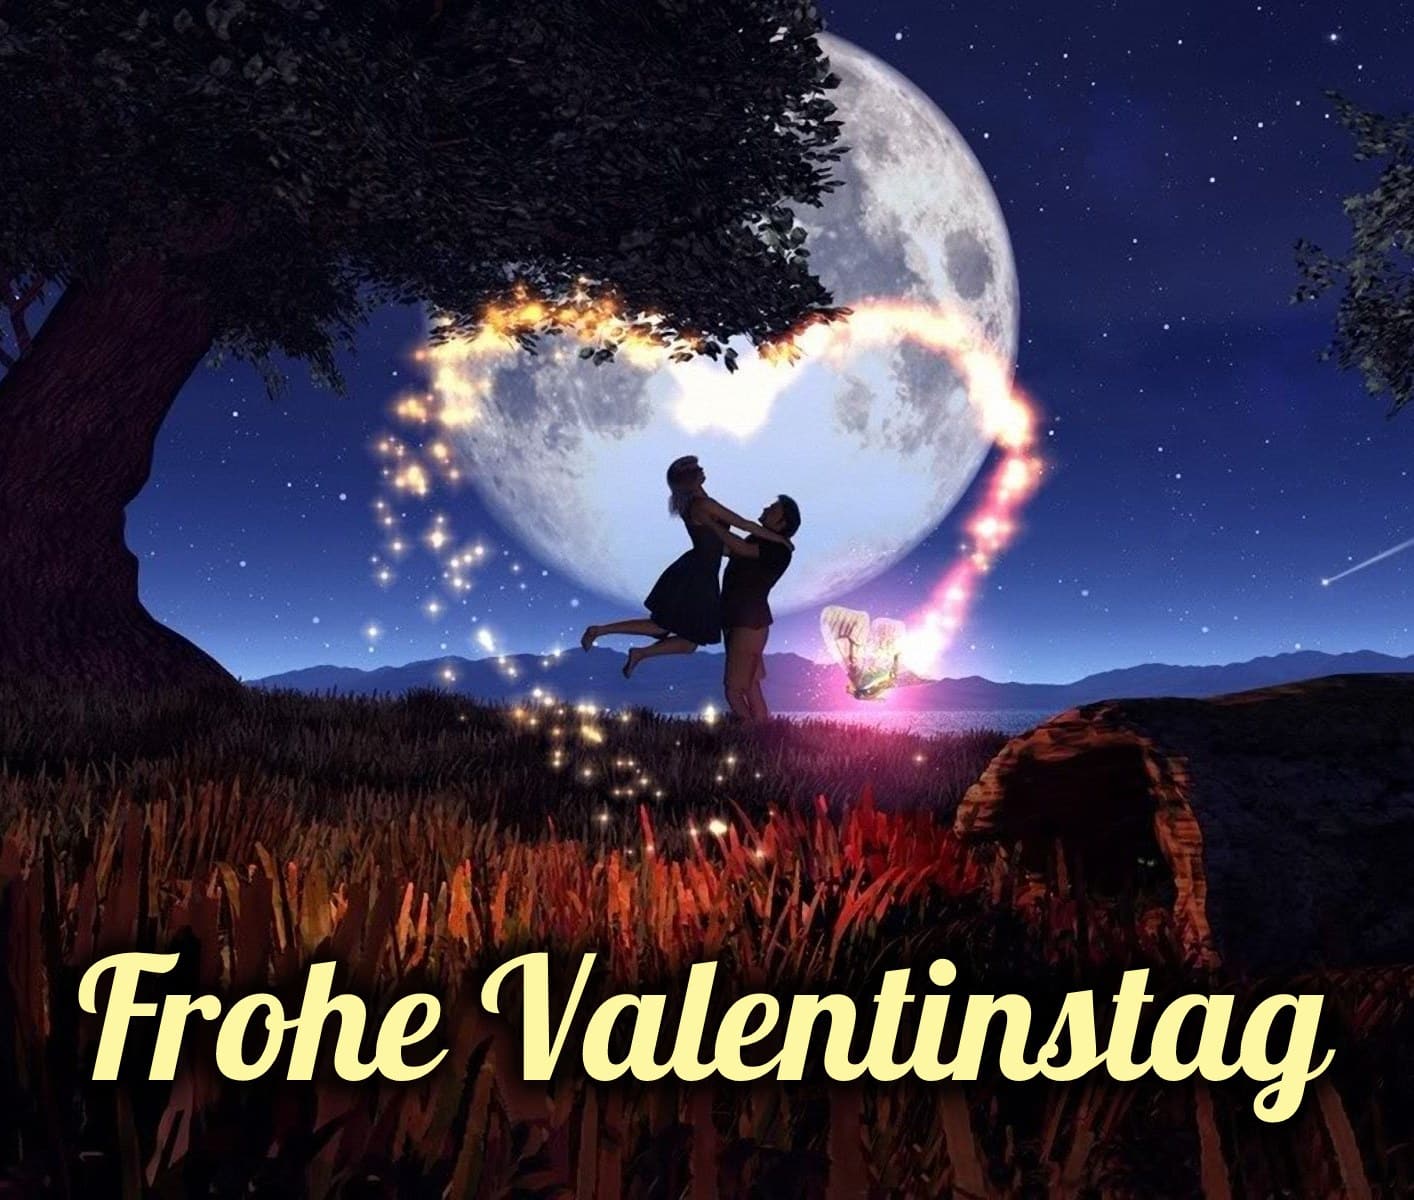 Frohe Valentinstag.